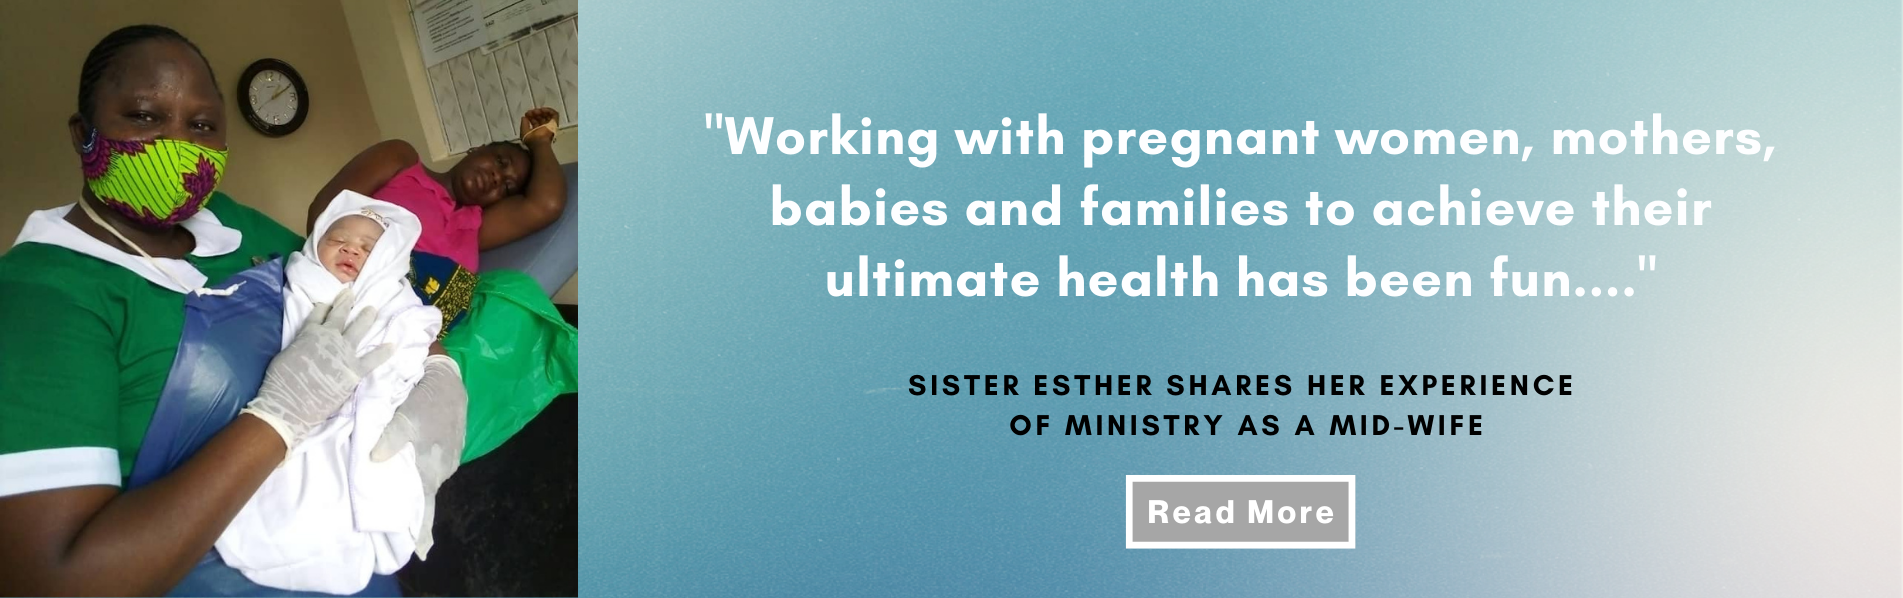 Sister Esther shares her experience of ministry as a mid-wife